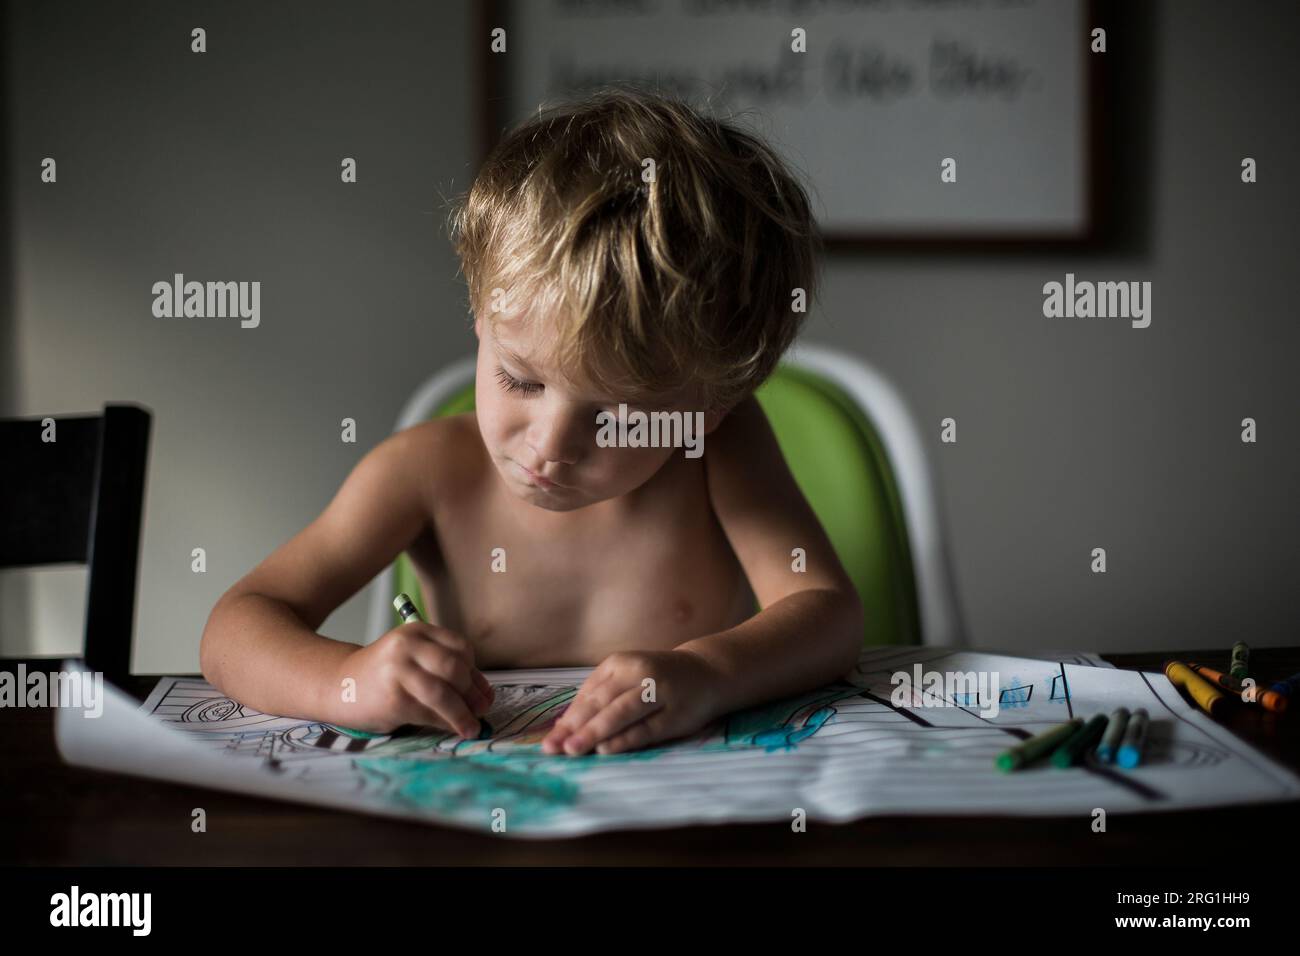 Young boy coloring at kitchen table Stock Photo